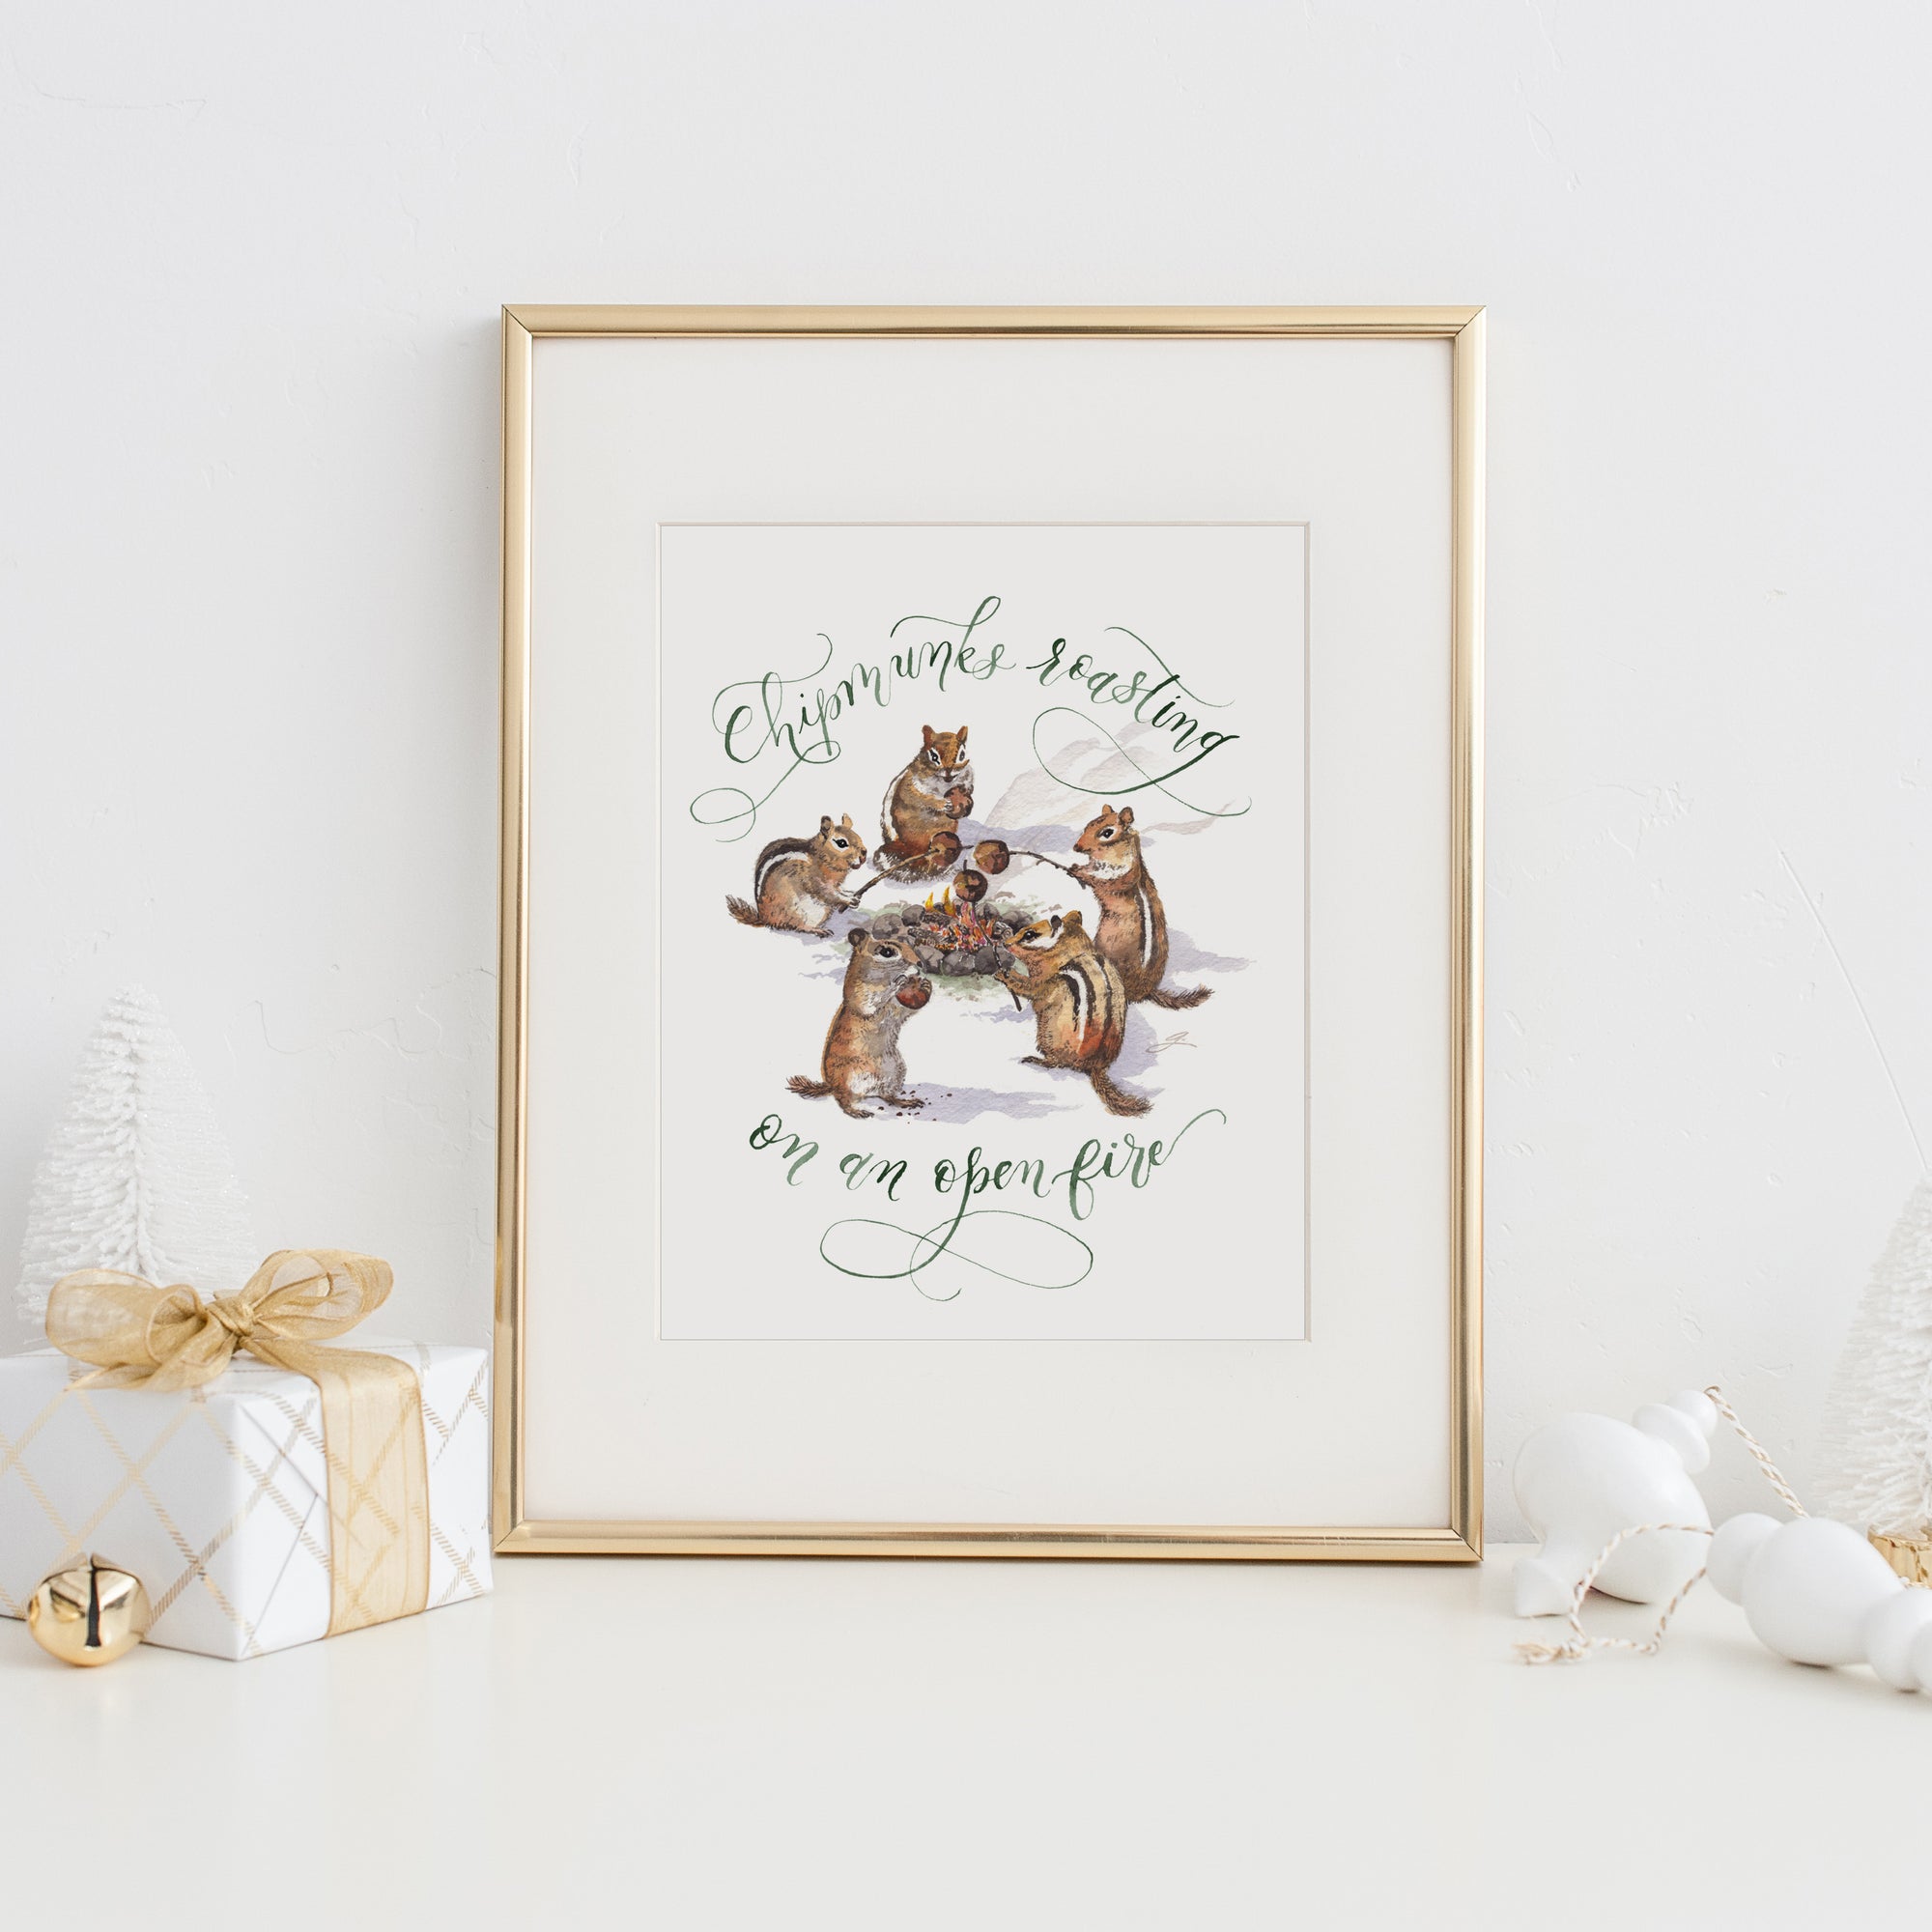 Chipmunks Roasting on an Open Fire Art Print | Father-Daughter Collaboration